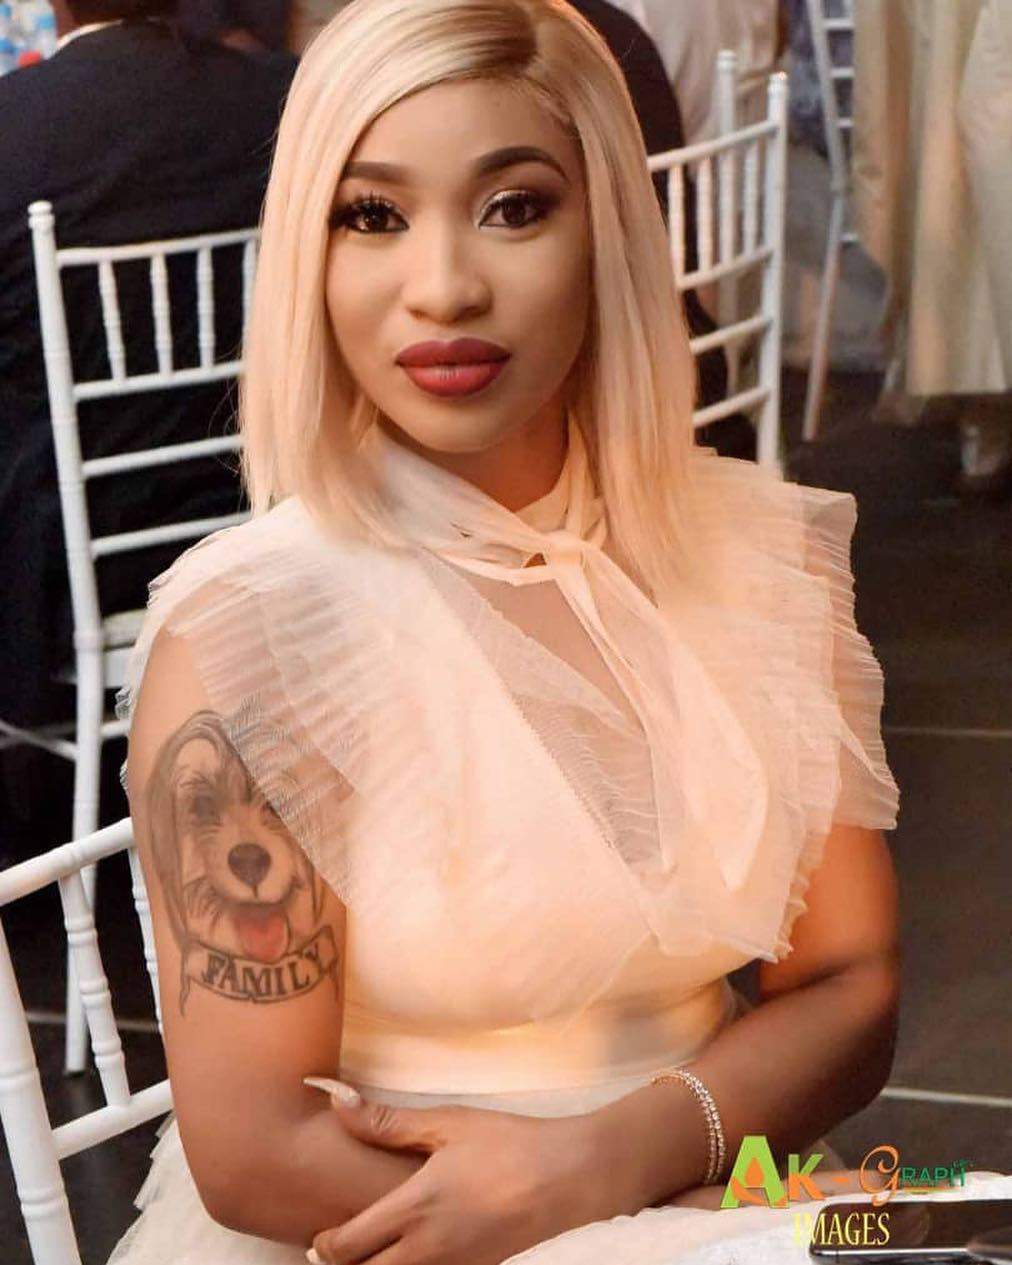 Tonto Dikeh and ex-husband, Olakunle Churchill shade each other